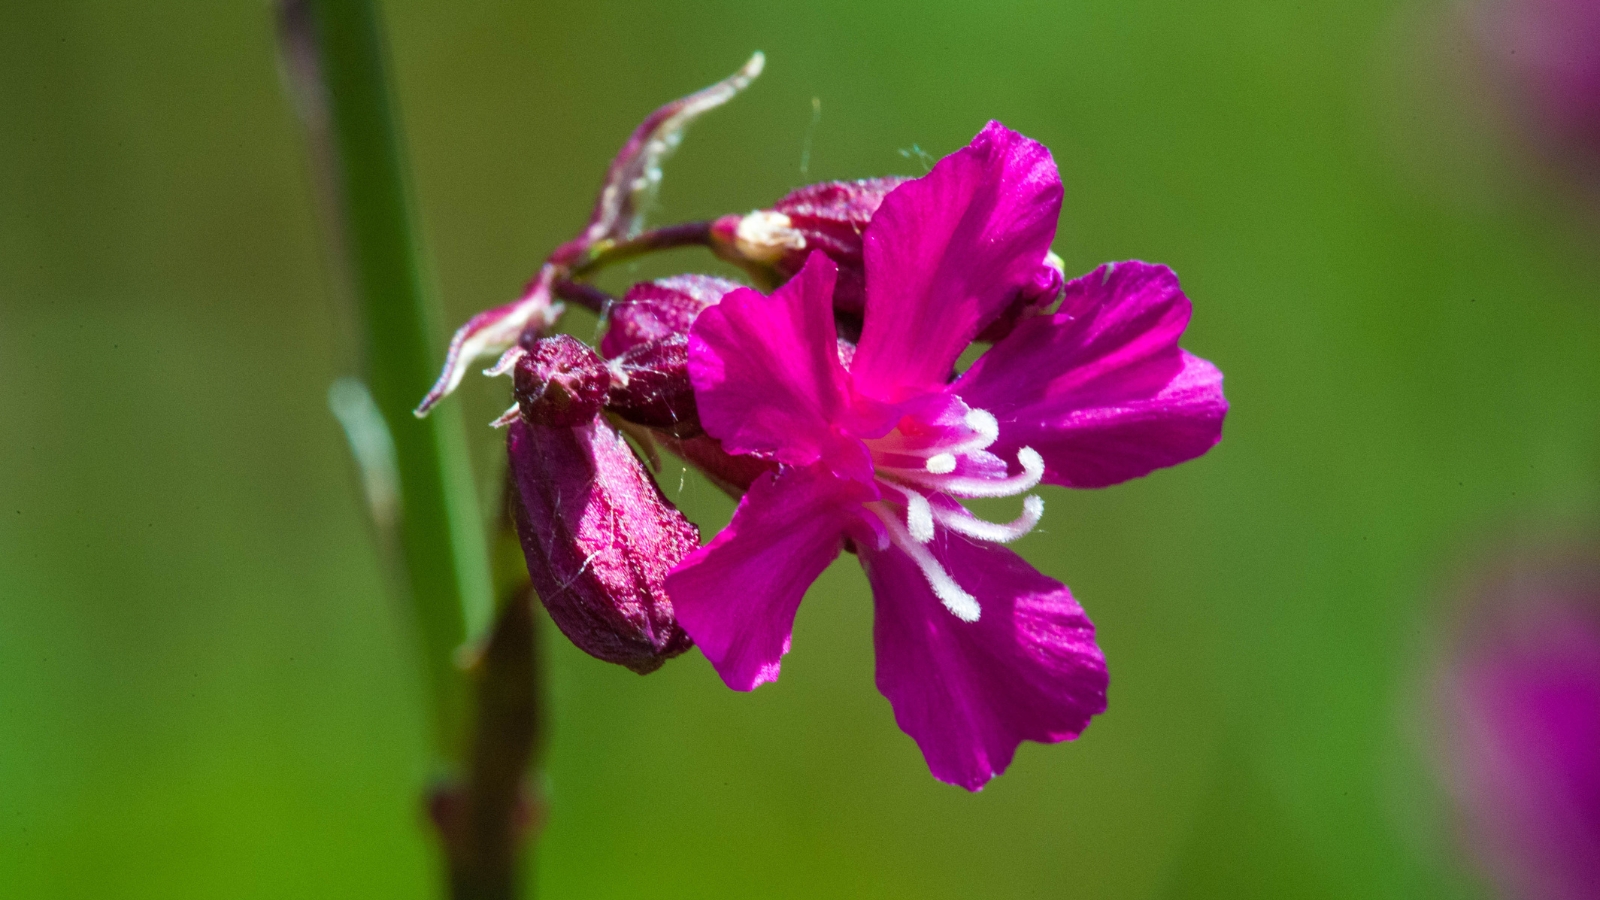 A close-up of a purple sticky catchfly flower basking in the sun's glow, its petals radiating under the golden light, while a soft blur of green foliage provides a serene backdrop.